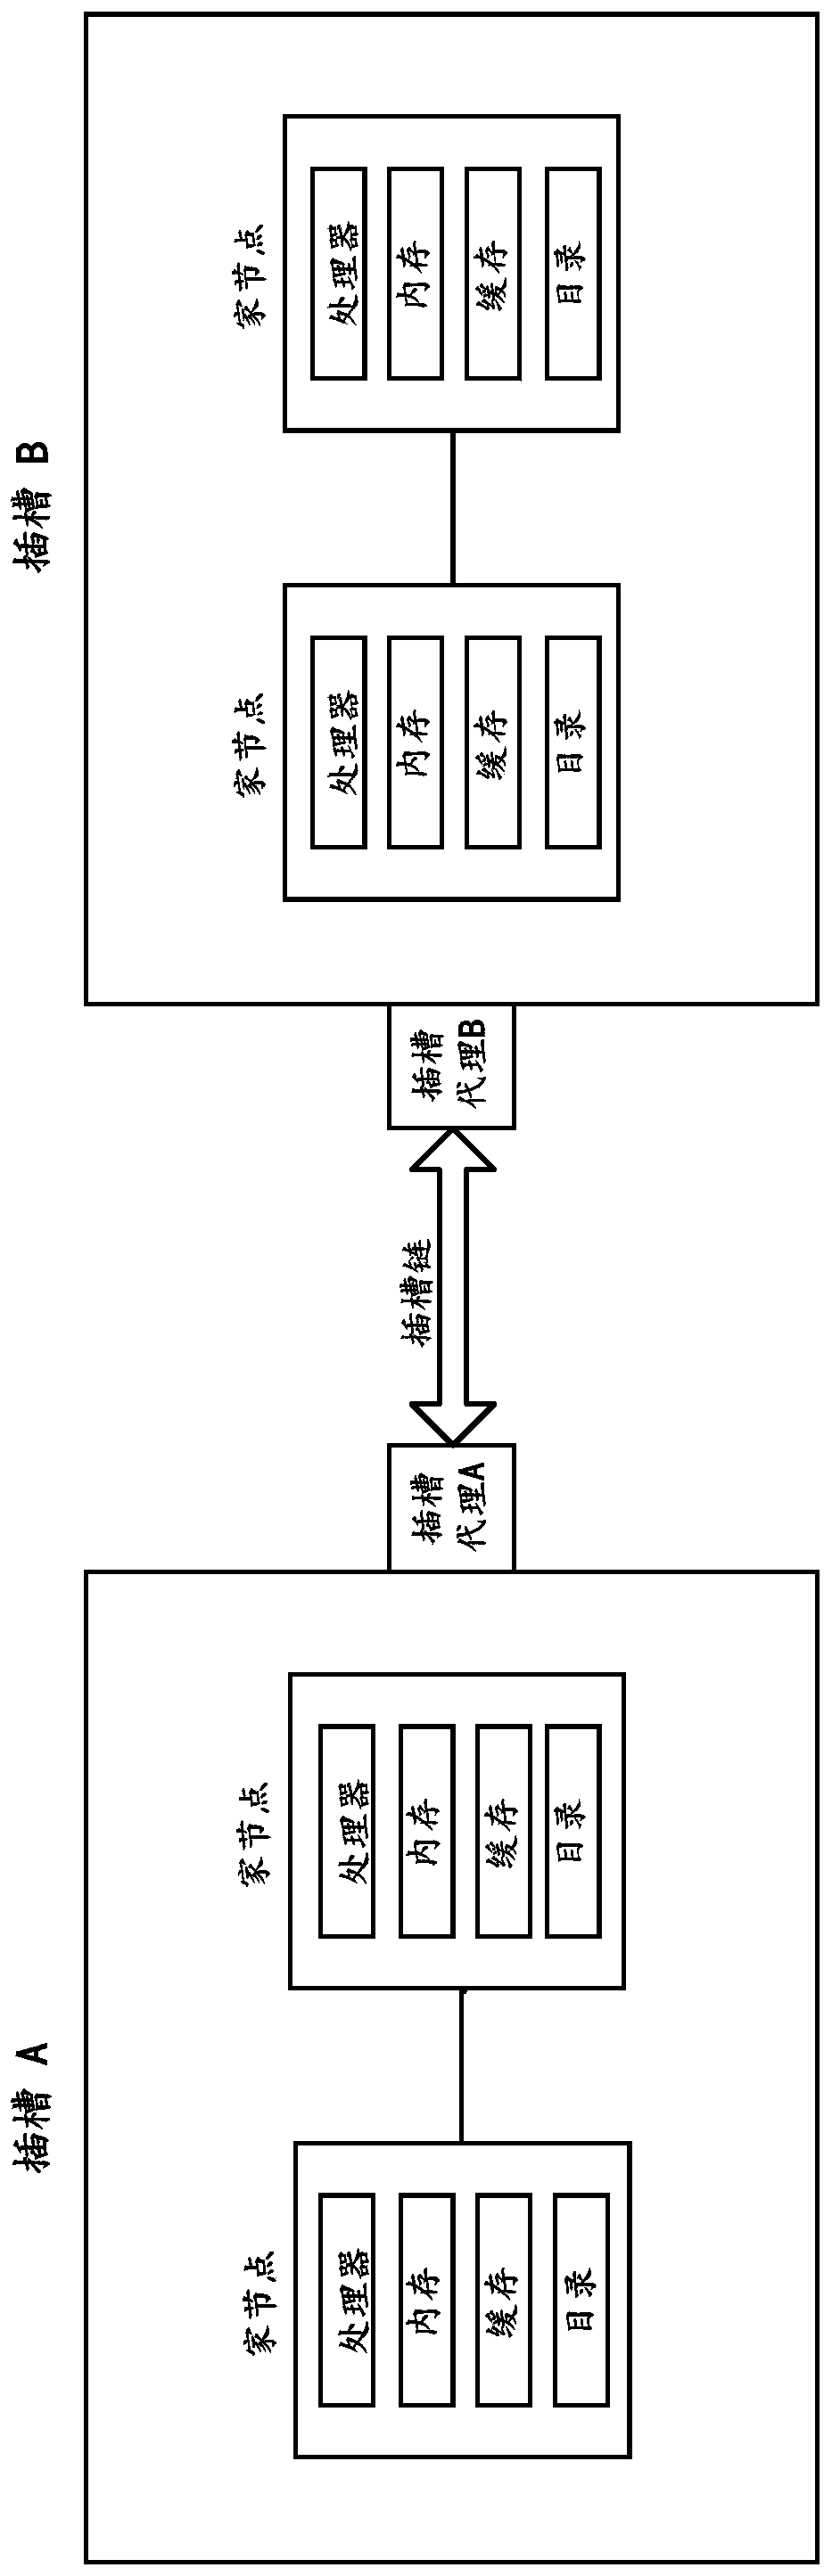 Method and device for data migration or exchange between slots and multiprocessor system